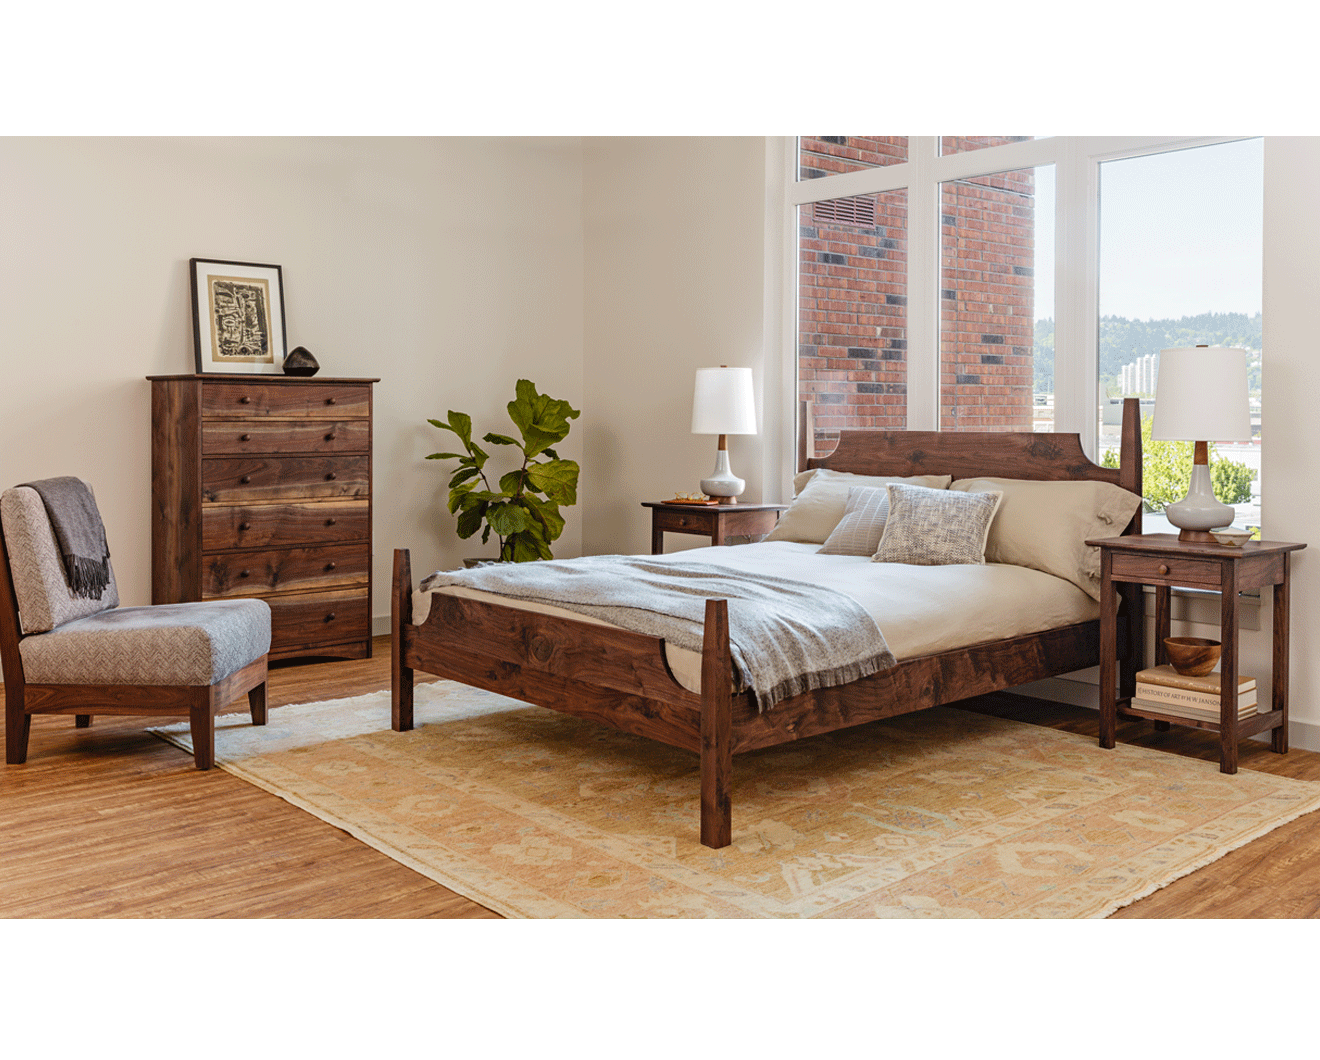 Arts and Crafts bed in Western Walnut with Shaker nighstands and Joinery dresser